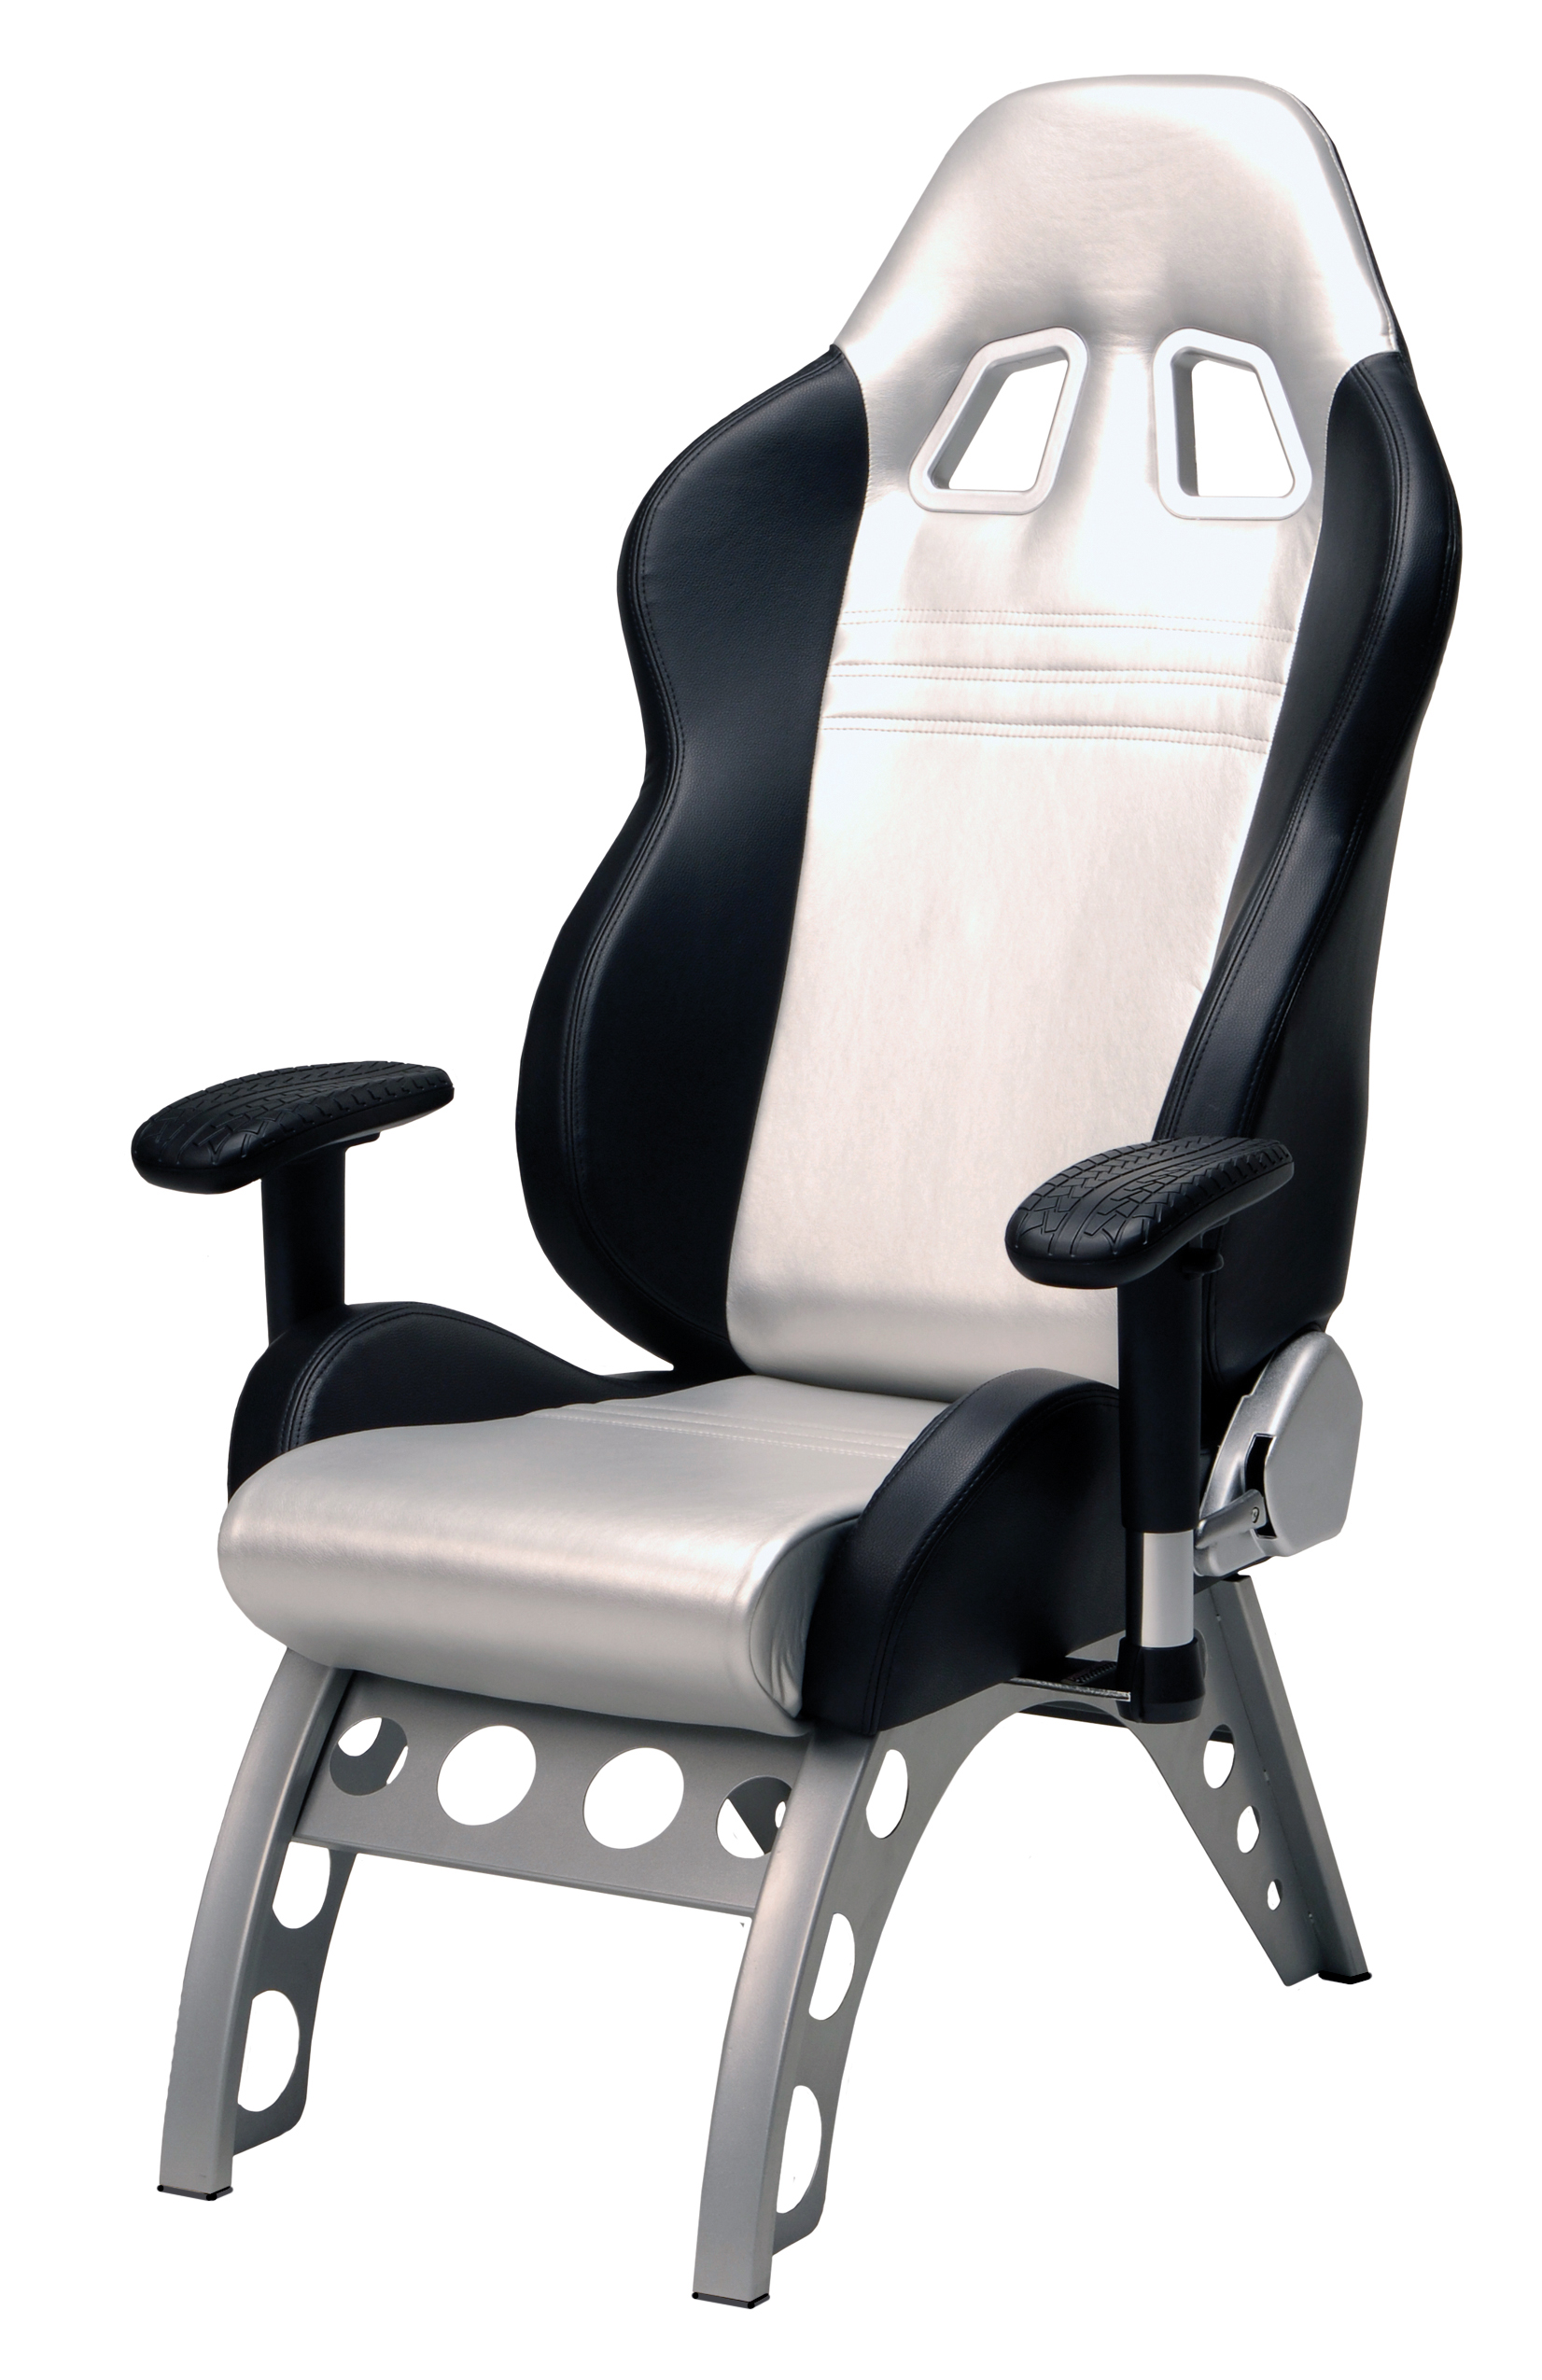 Intro-Tech Automotive, Pitstop Furniture, GT4000S Rec. Chair Silver, Desk Chair